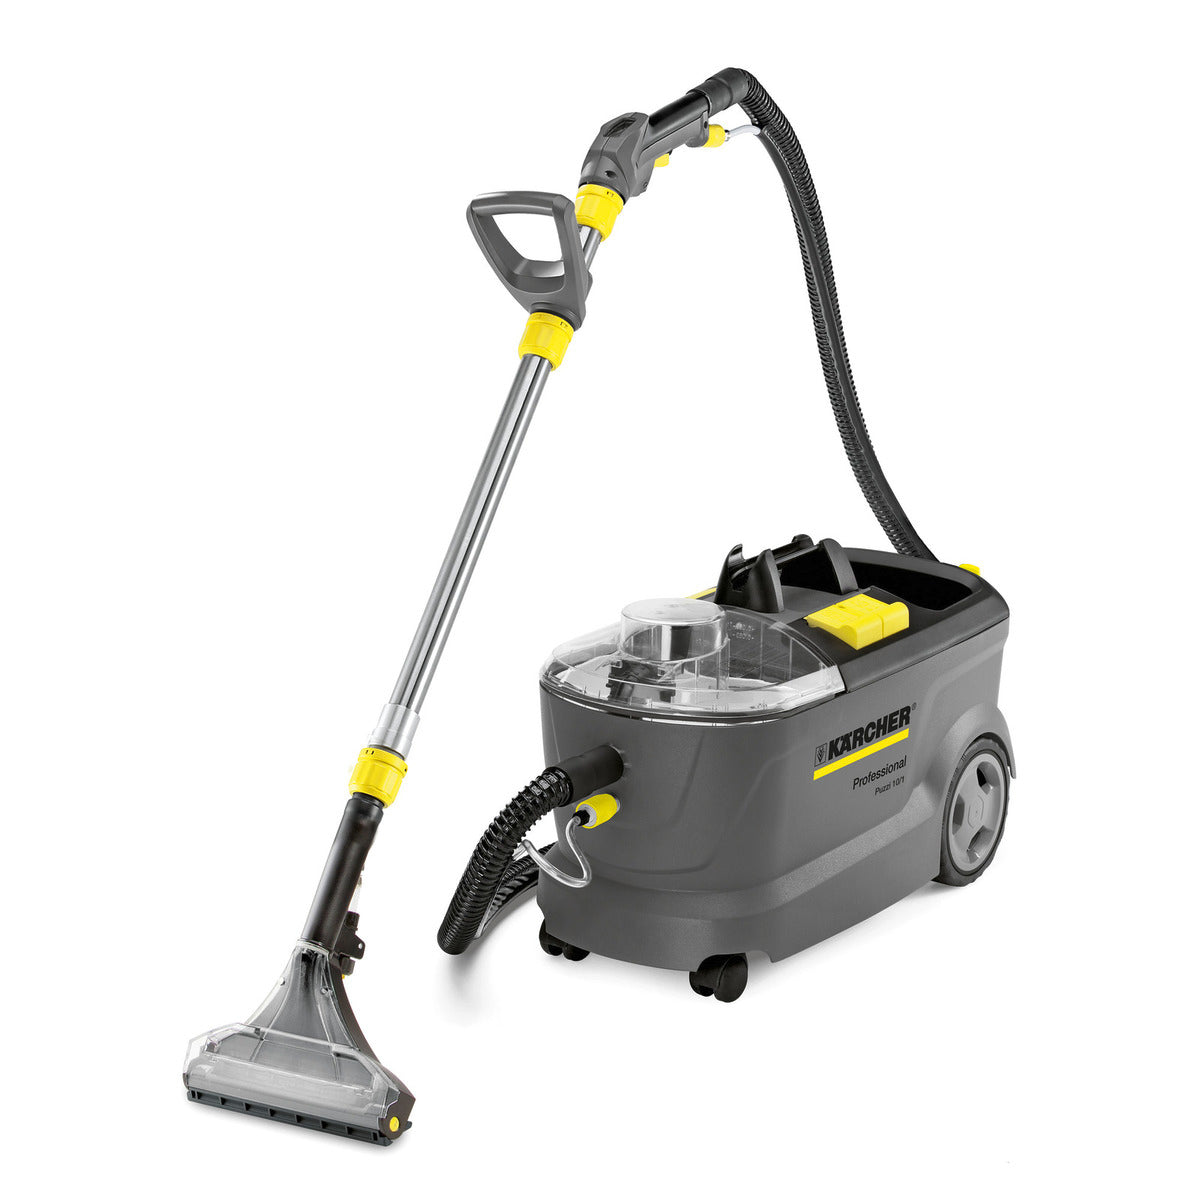 Karcher Puzzi 10/1, Carpet Spotter, 2.5 Gallon, 14.5 PSI, Cold Water, 8' Hoses Upholstery Tool